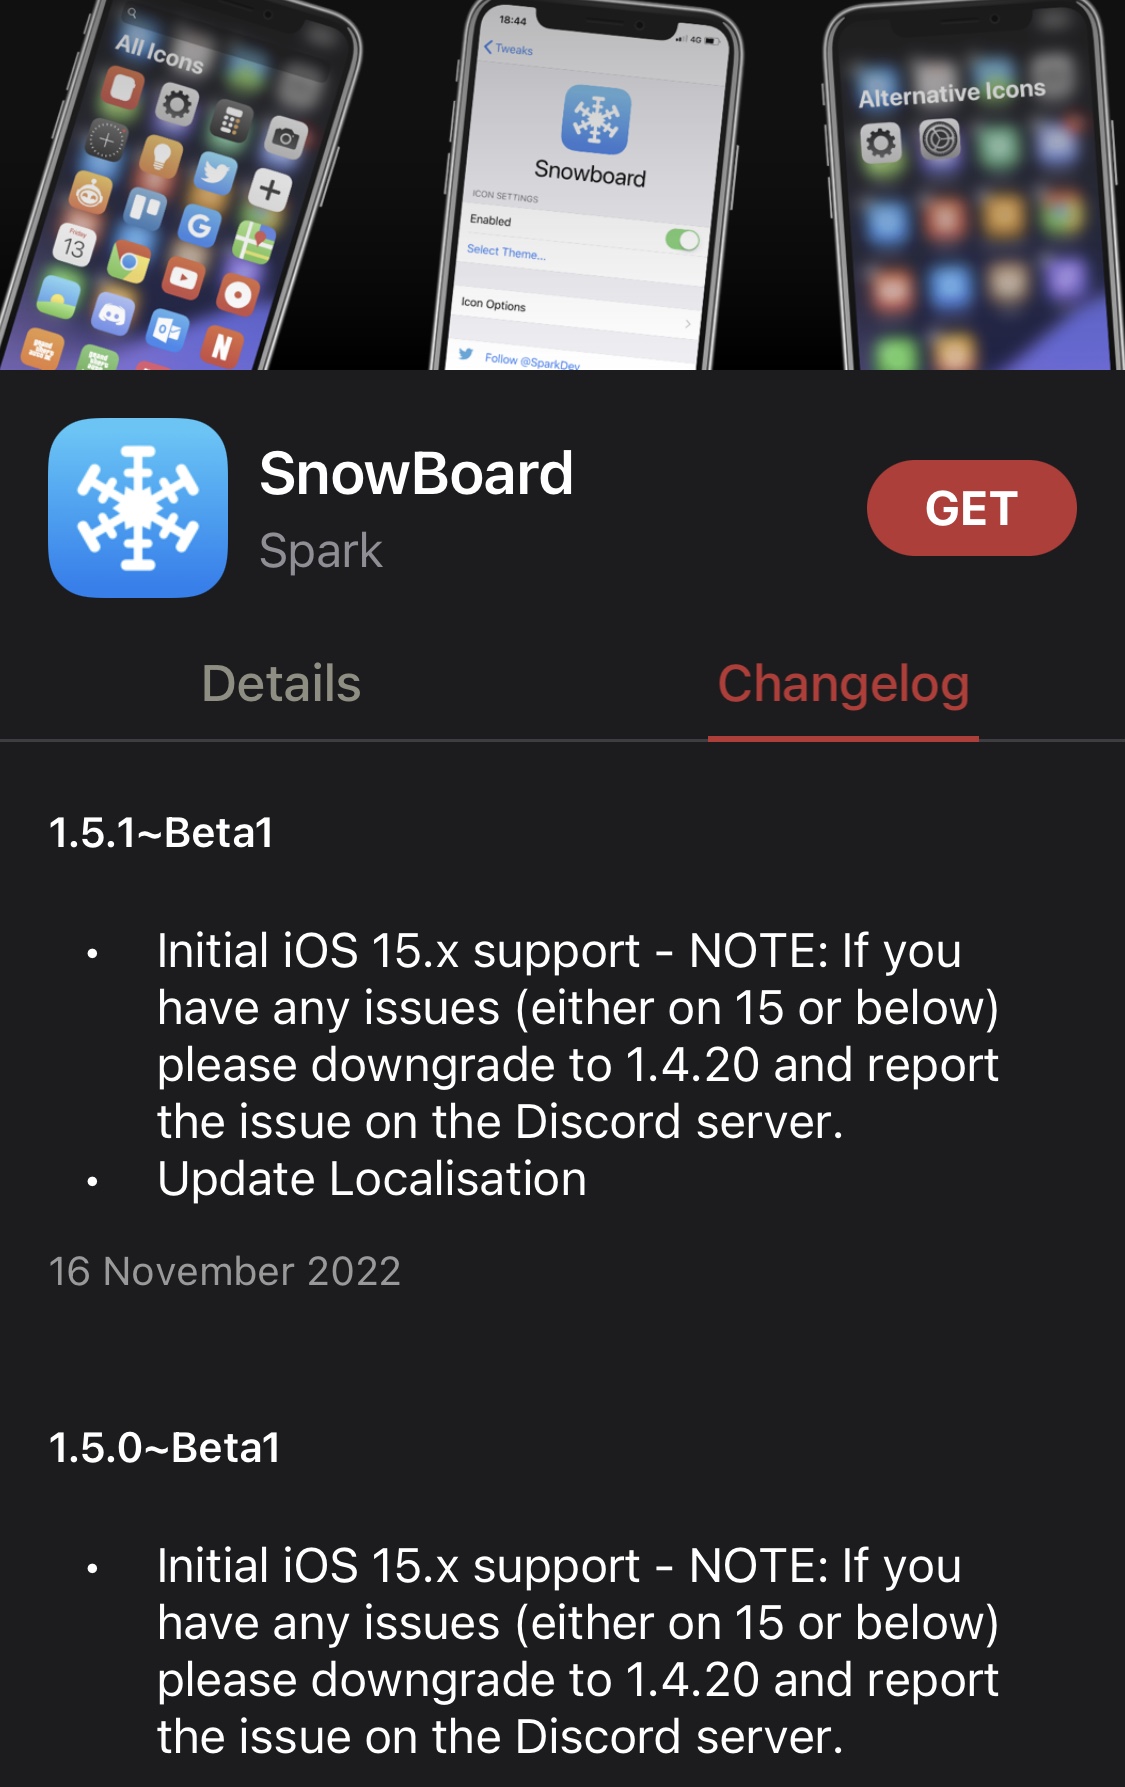 SnowBoard theming engine by SparkDev adds preliminary iOS 15 support for palera1n.